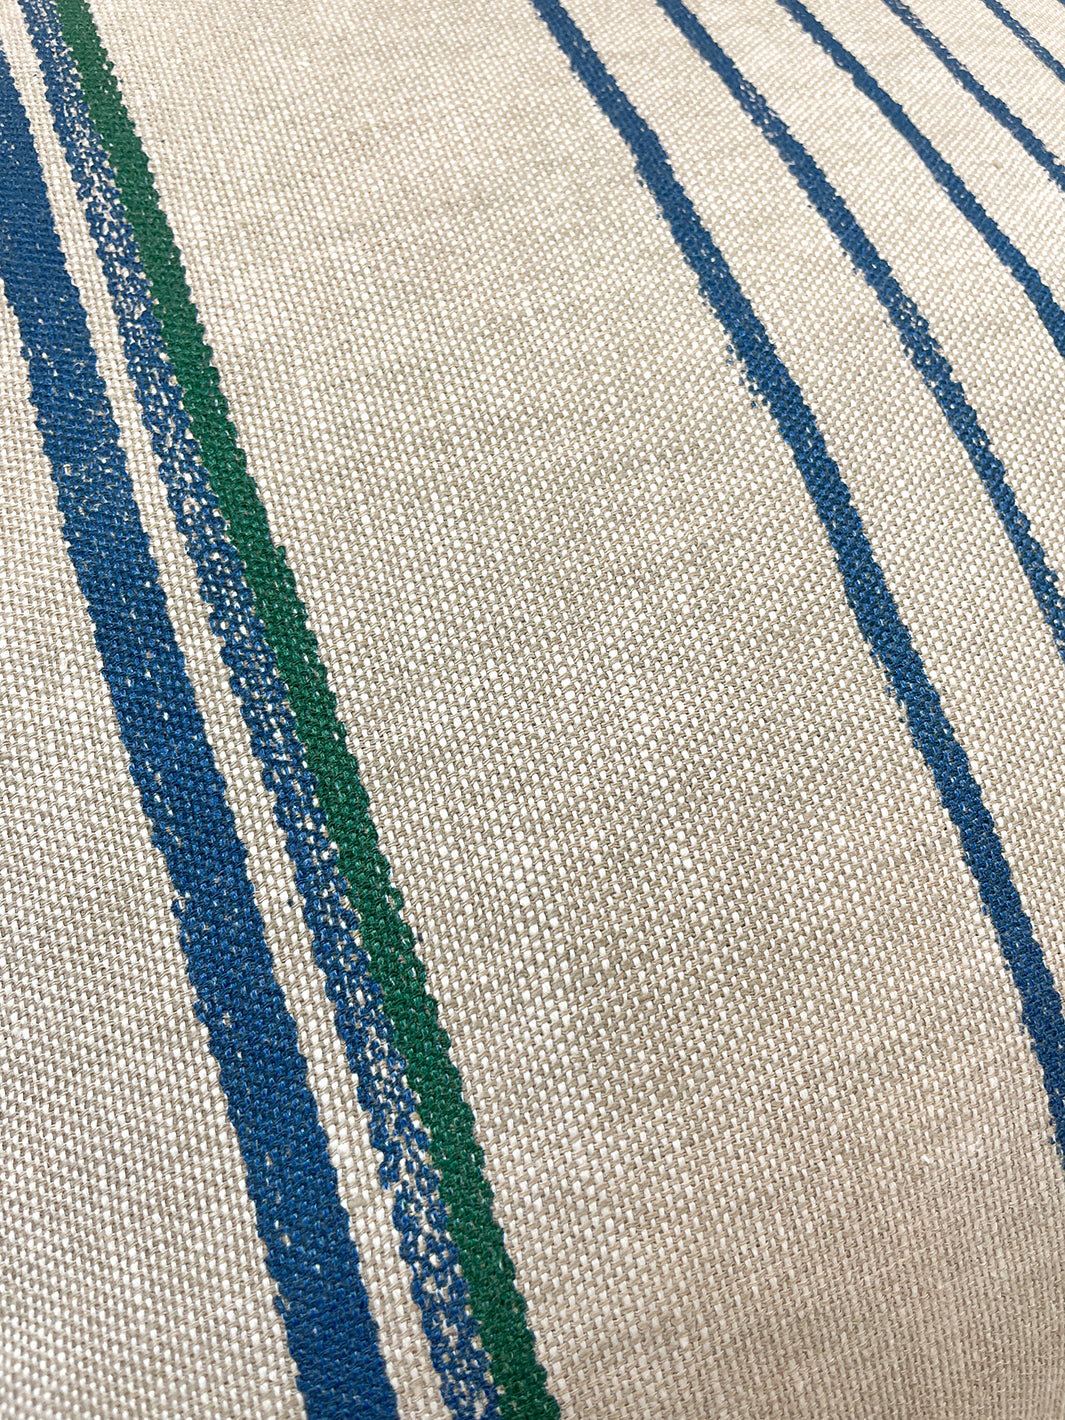 'Two Tone Stripe' Throw Pillow by Nathan Turner - Sea Green on Flax Linen